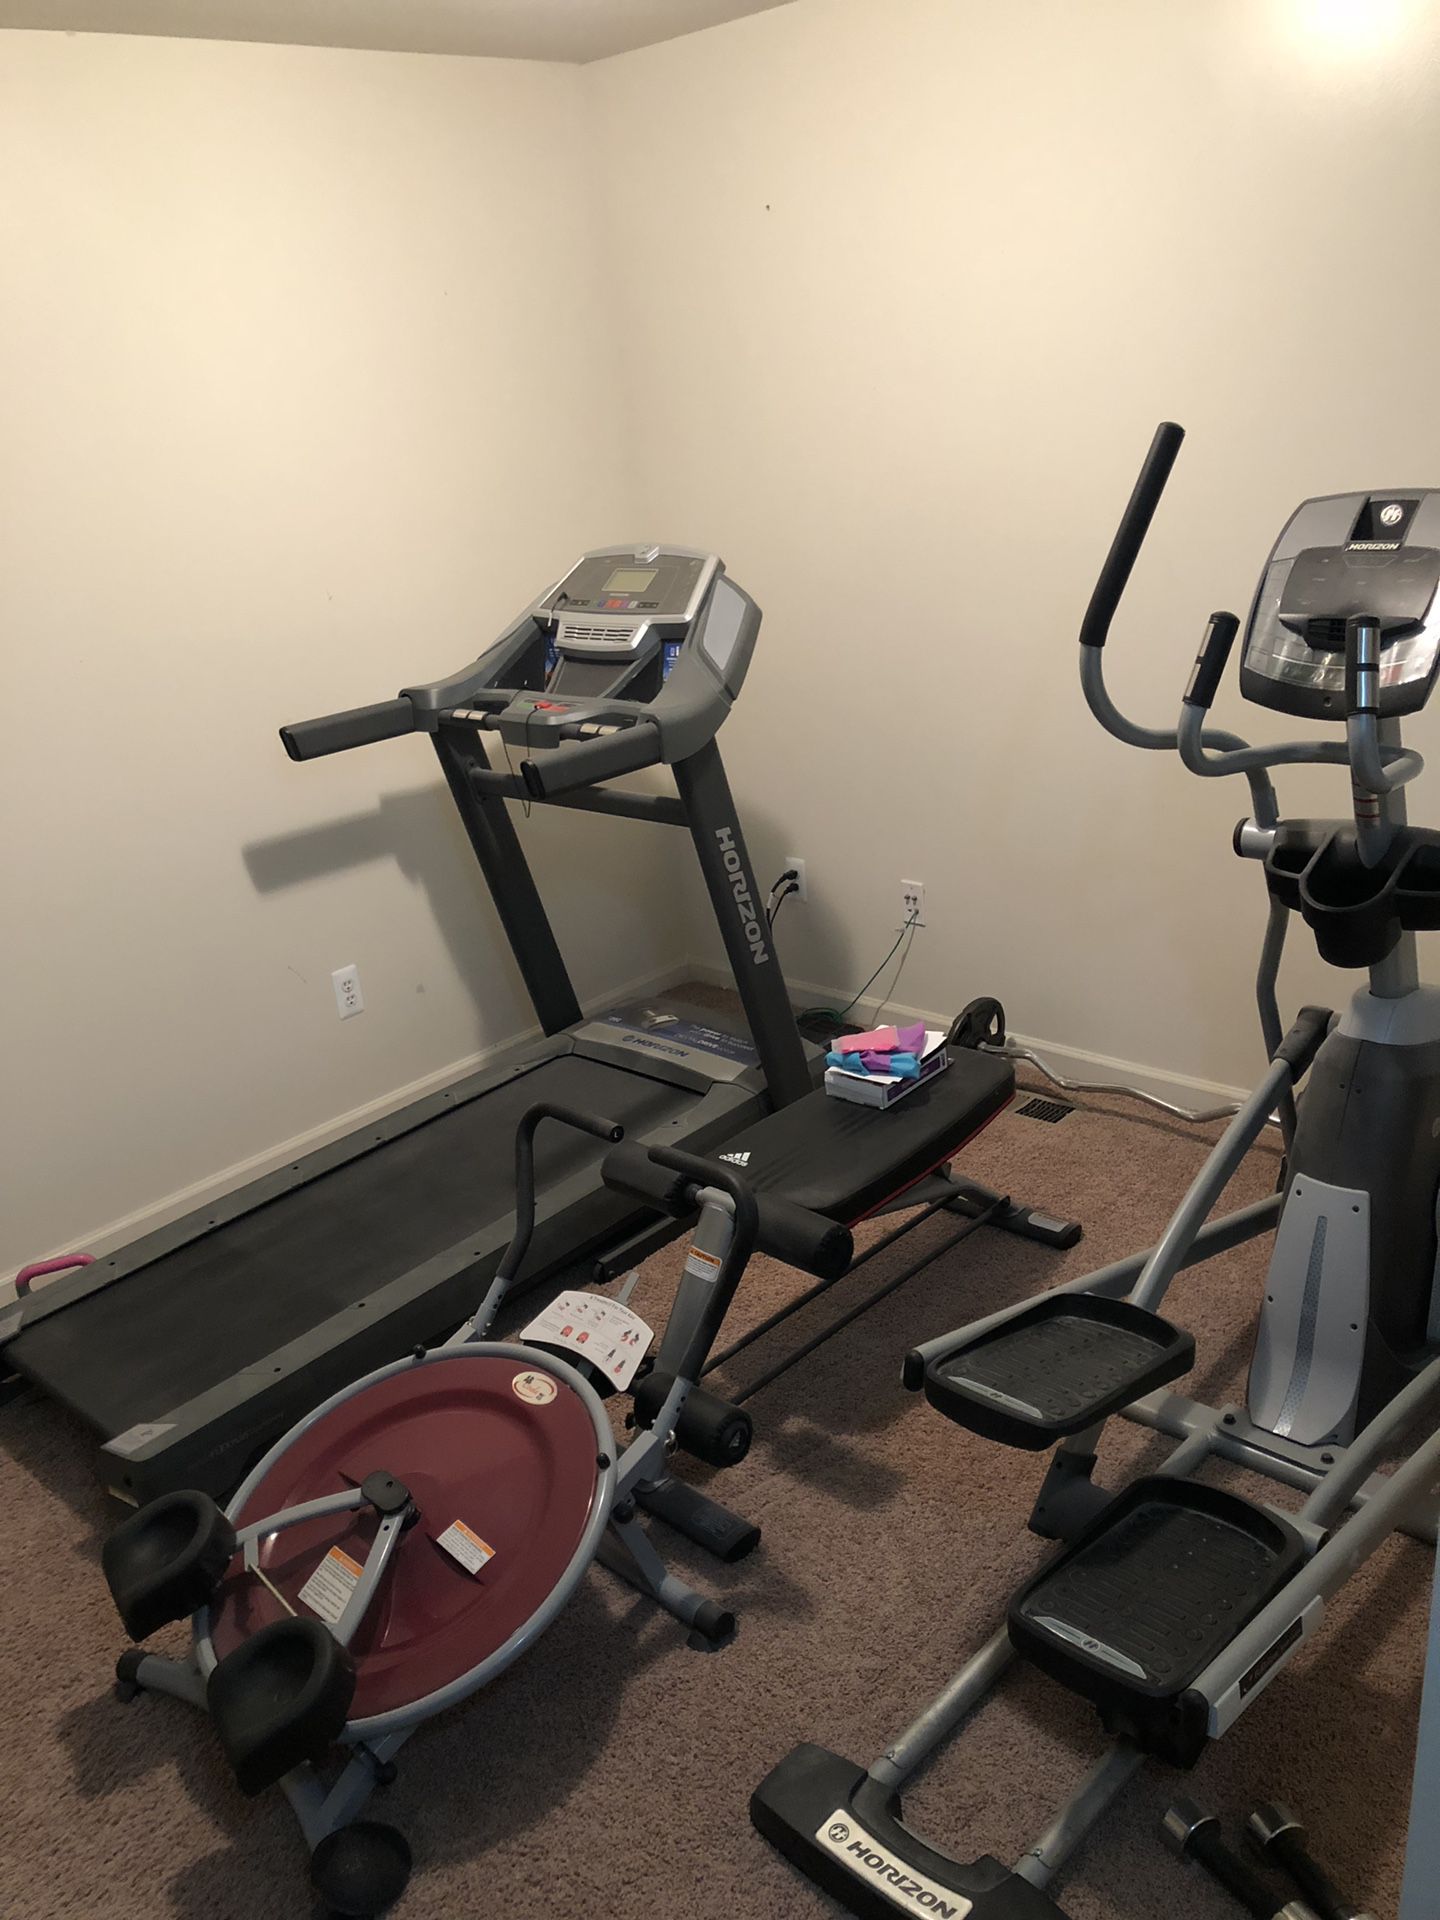 Workout Room $800 everything included